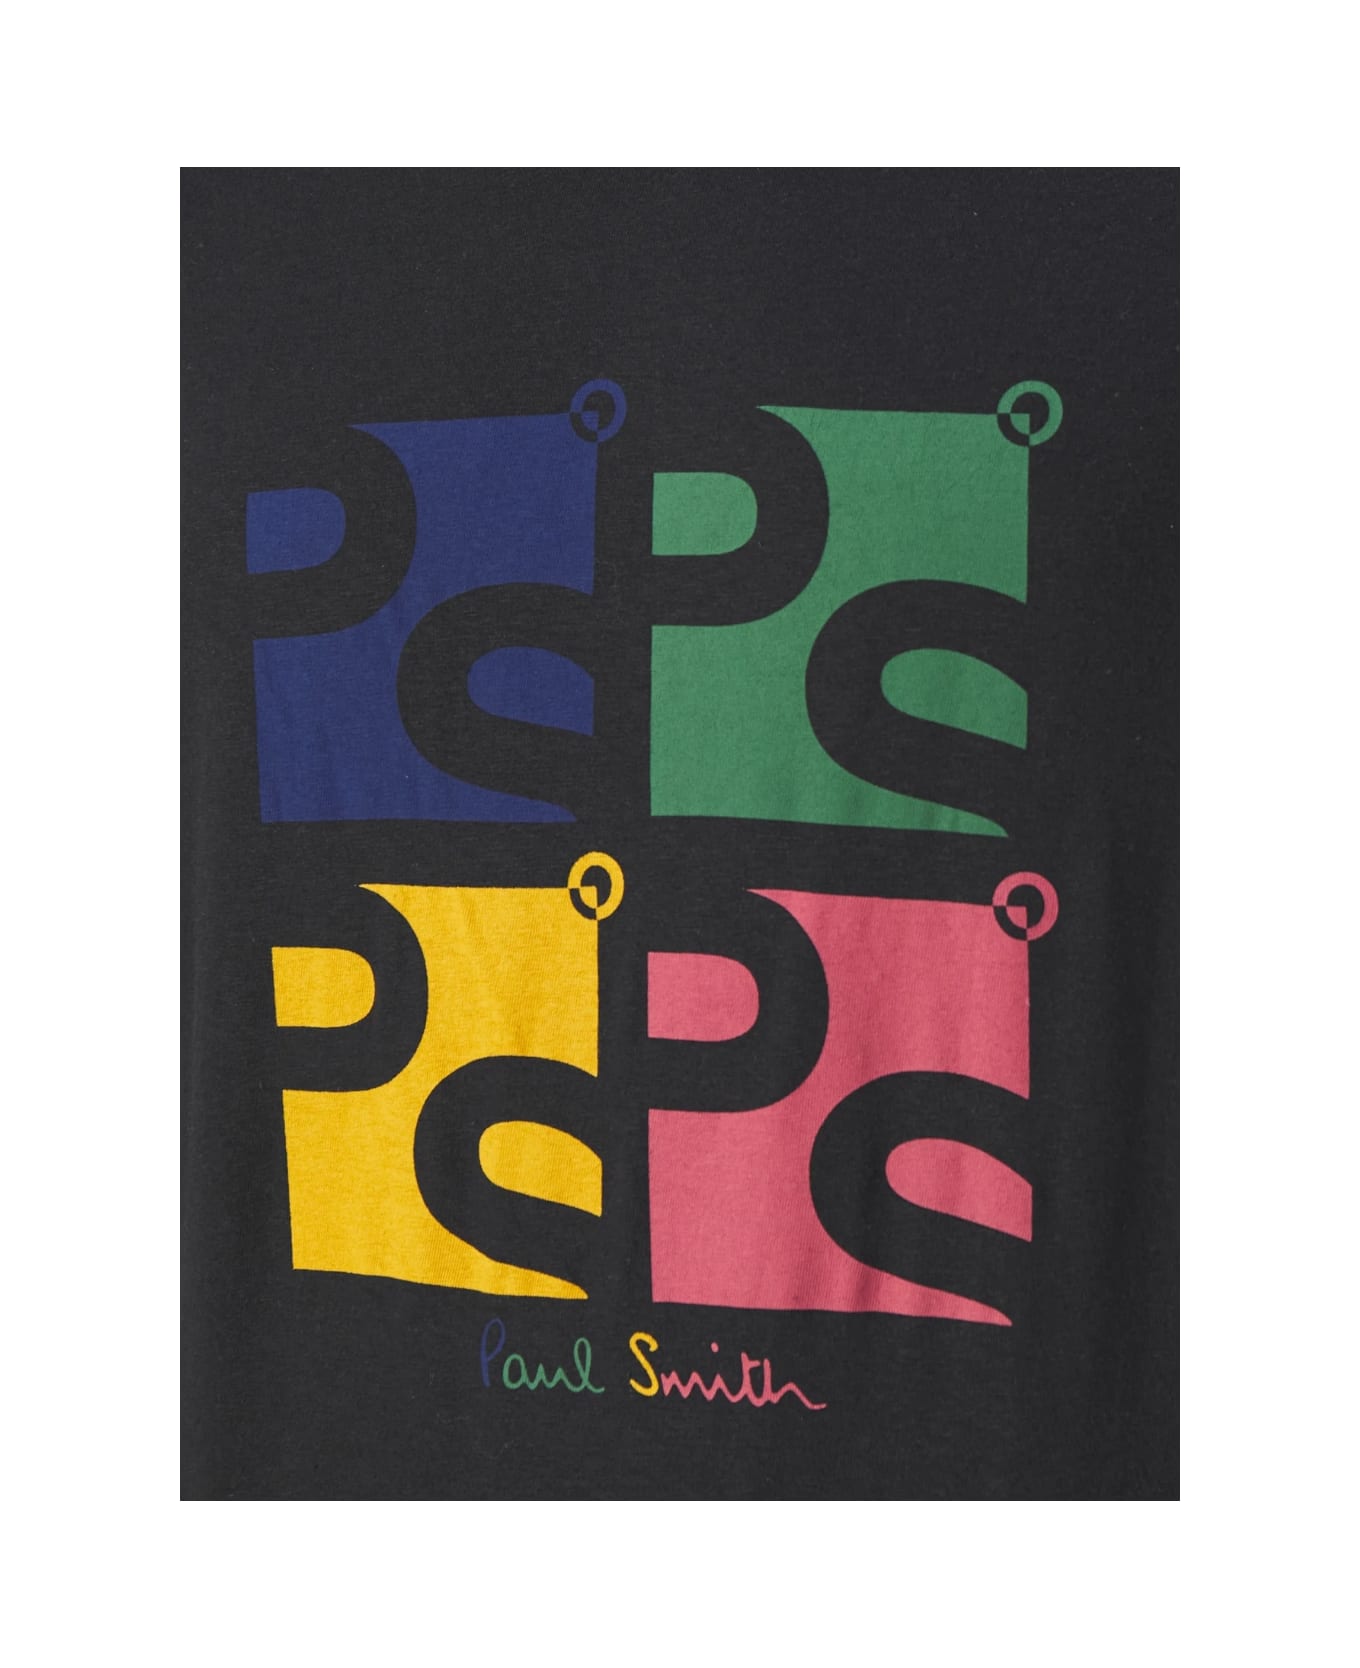 PS by Paul Smith Mens Reg Fit Ss T Shirt Square Ps - Blacks シャツ